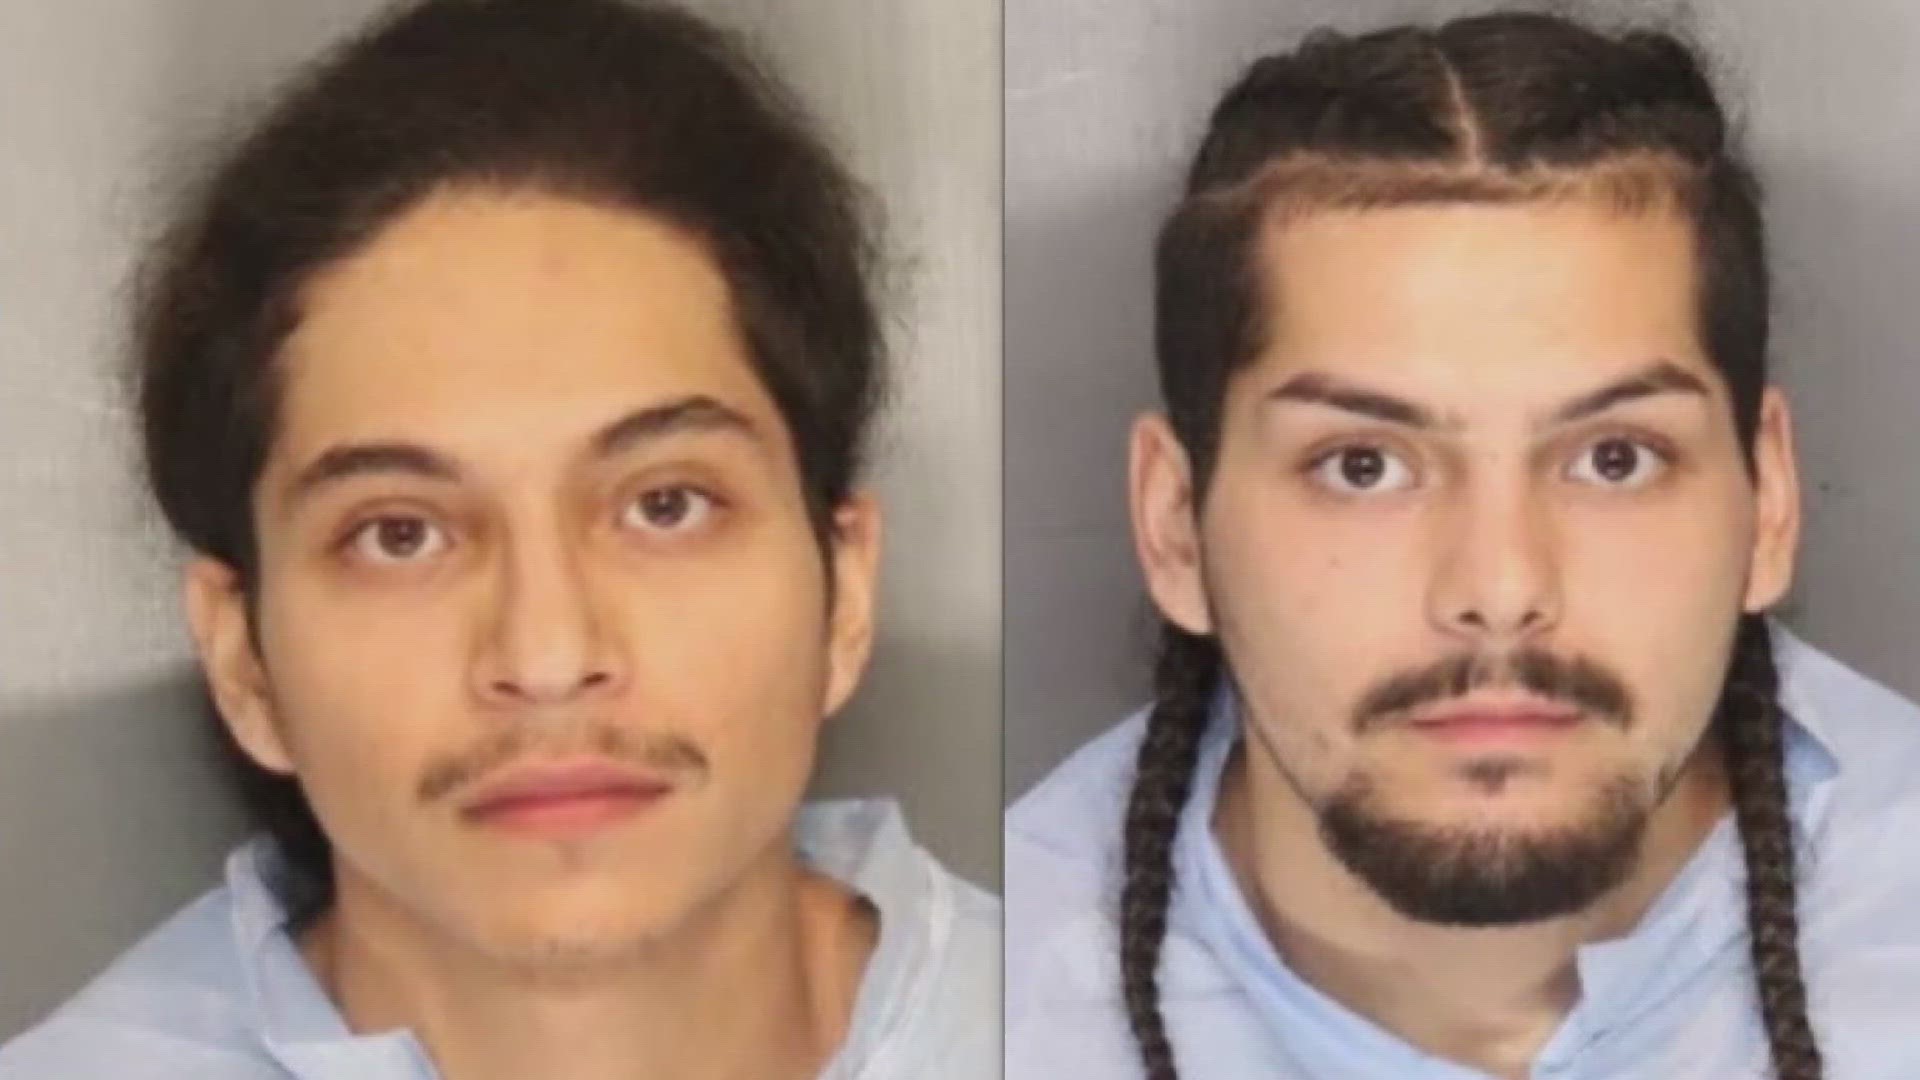 Police say the two suspects now face upgraded charges of murder